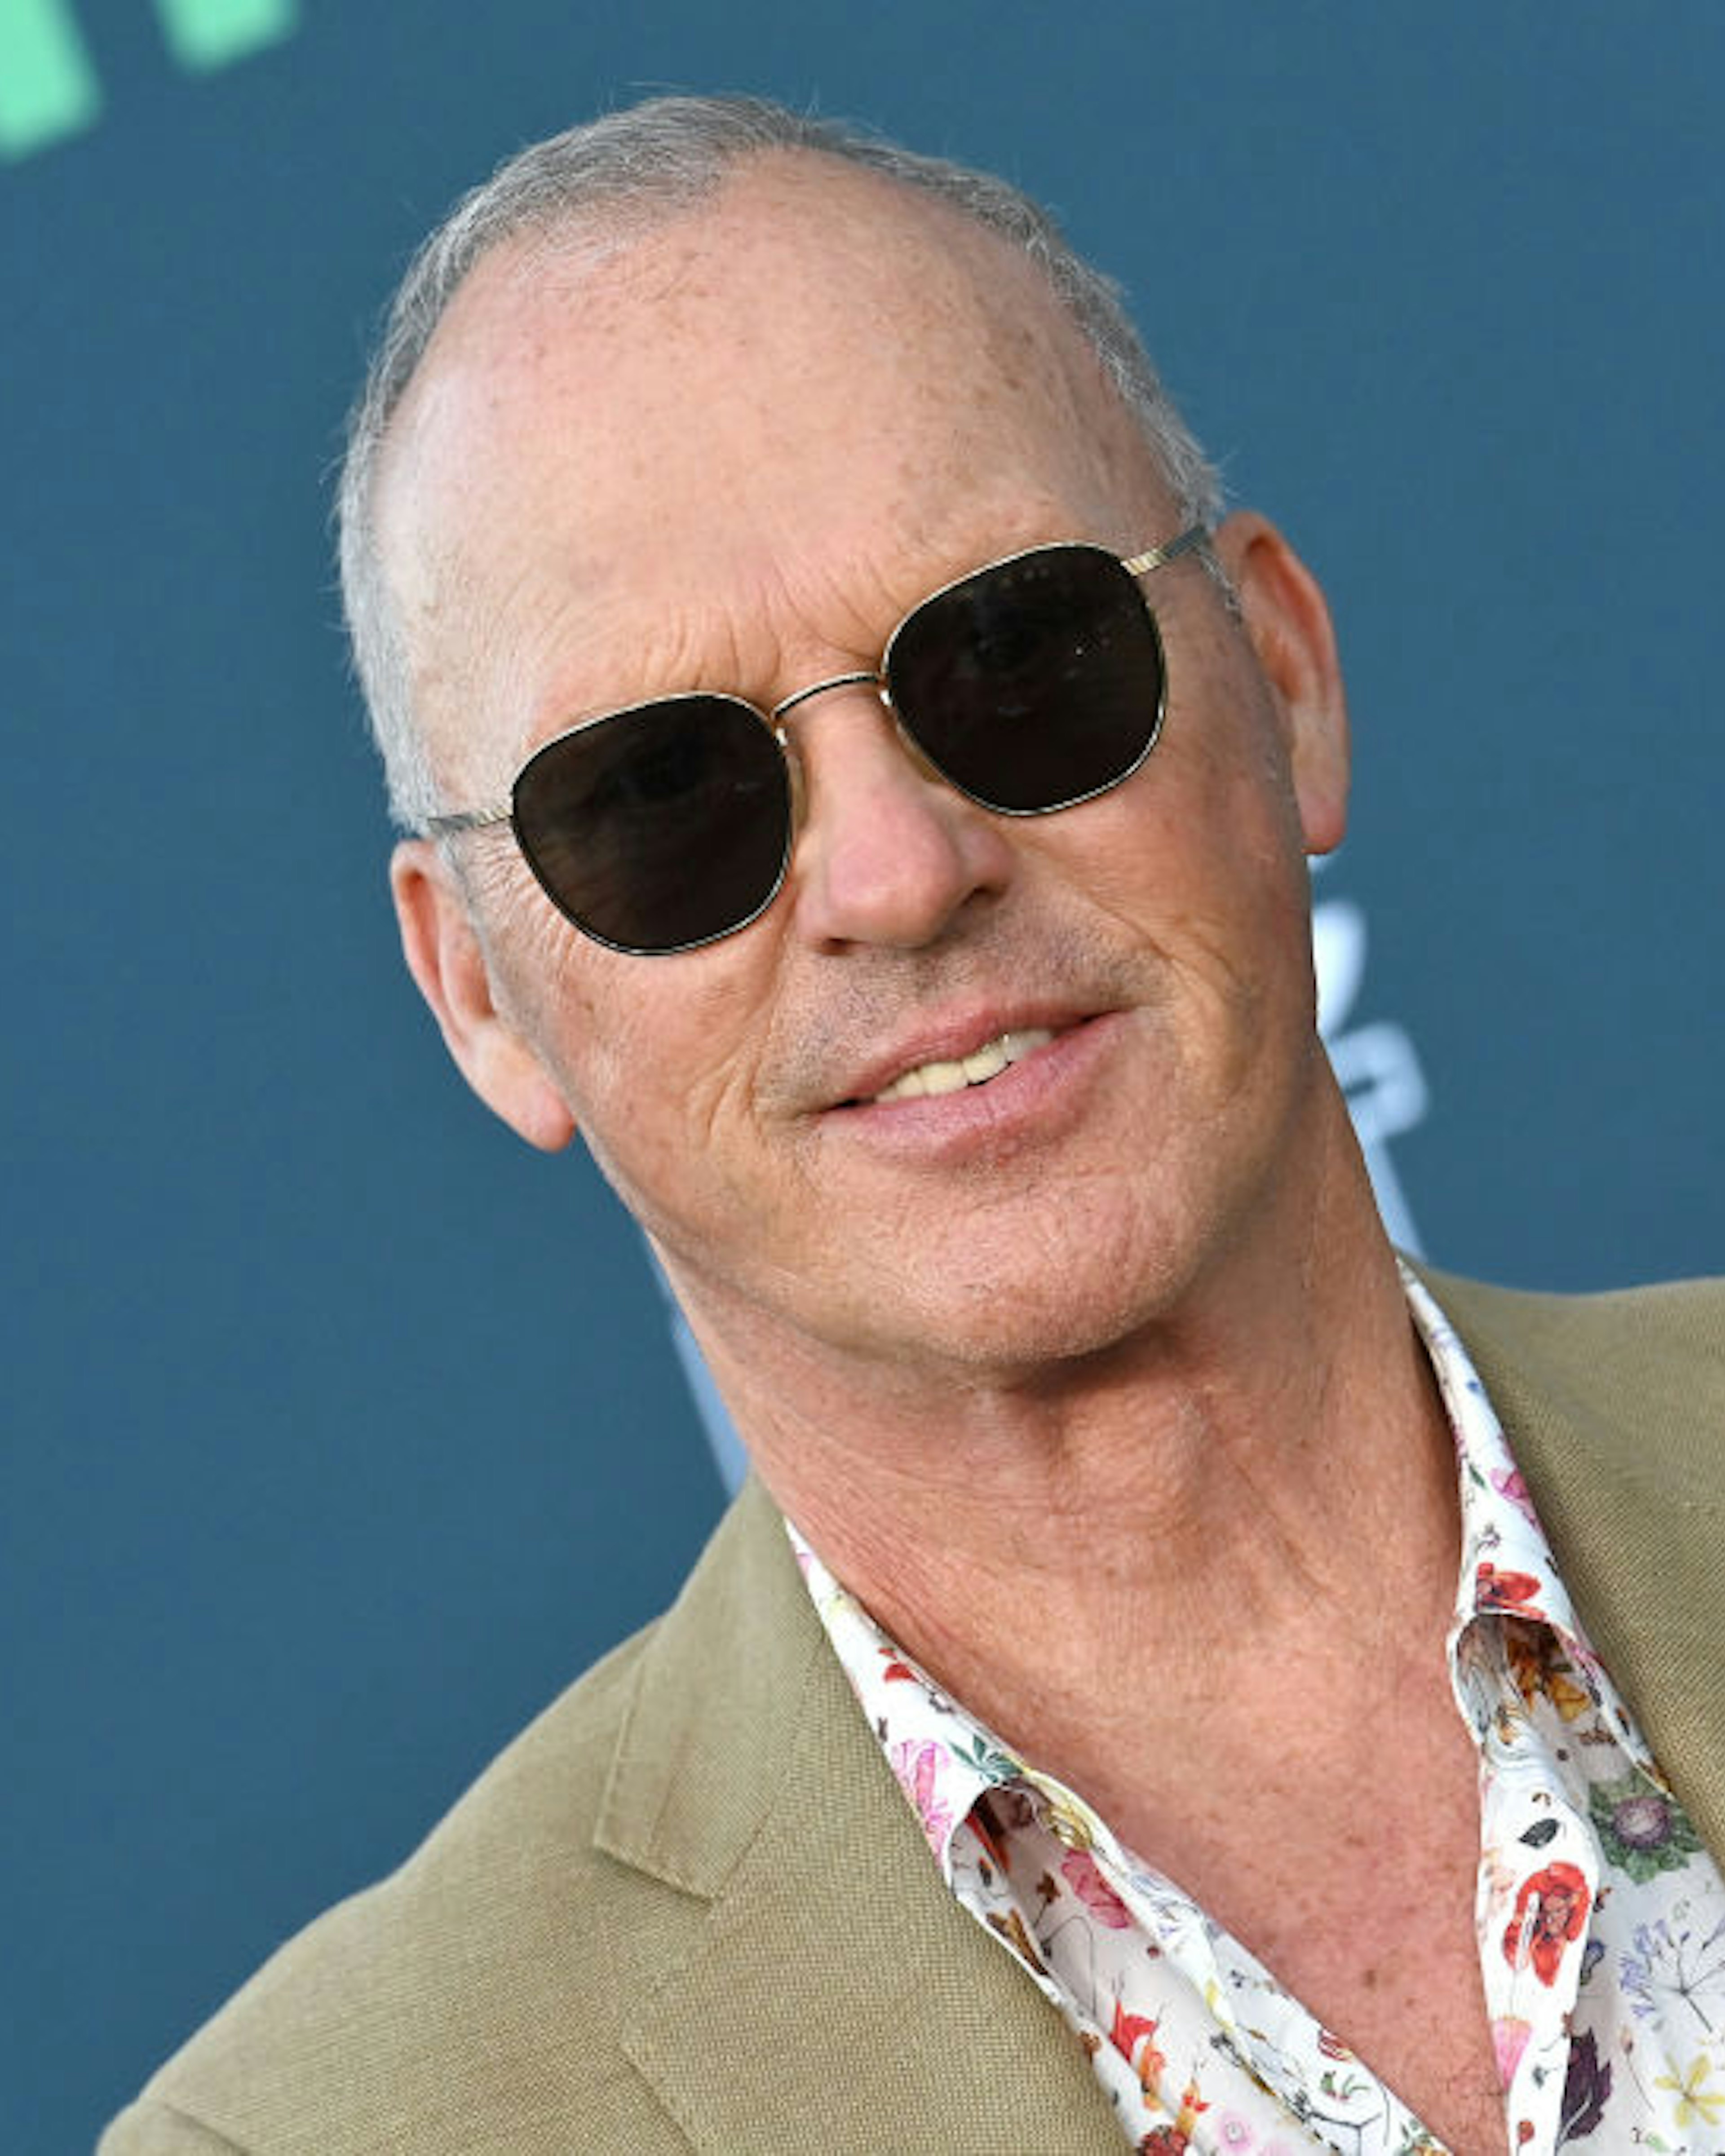 LOS ANGELES, CALIFORNIA - JUNE 14: Michael Keaton attends the Special Screening and Q&amp;A Event for Hulu's "DOPESICK" at El Capitan Theatre on June 14, 2022 in Los Angeles, California. (Photo by Axelle/Bauer-Griffin/FilmMagic)